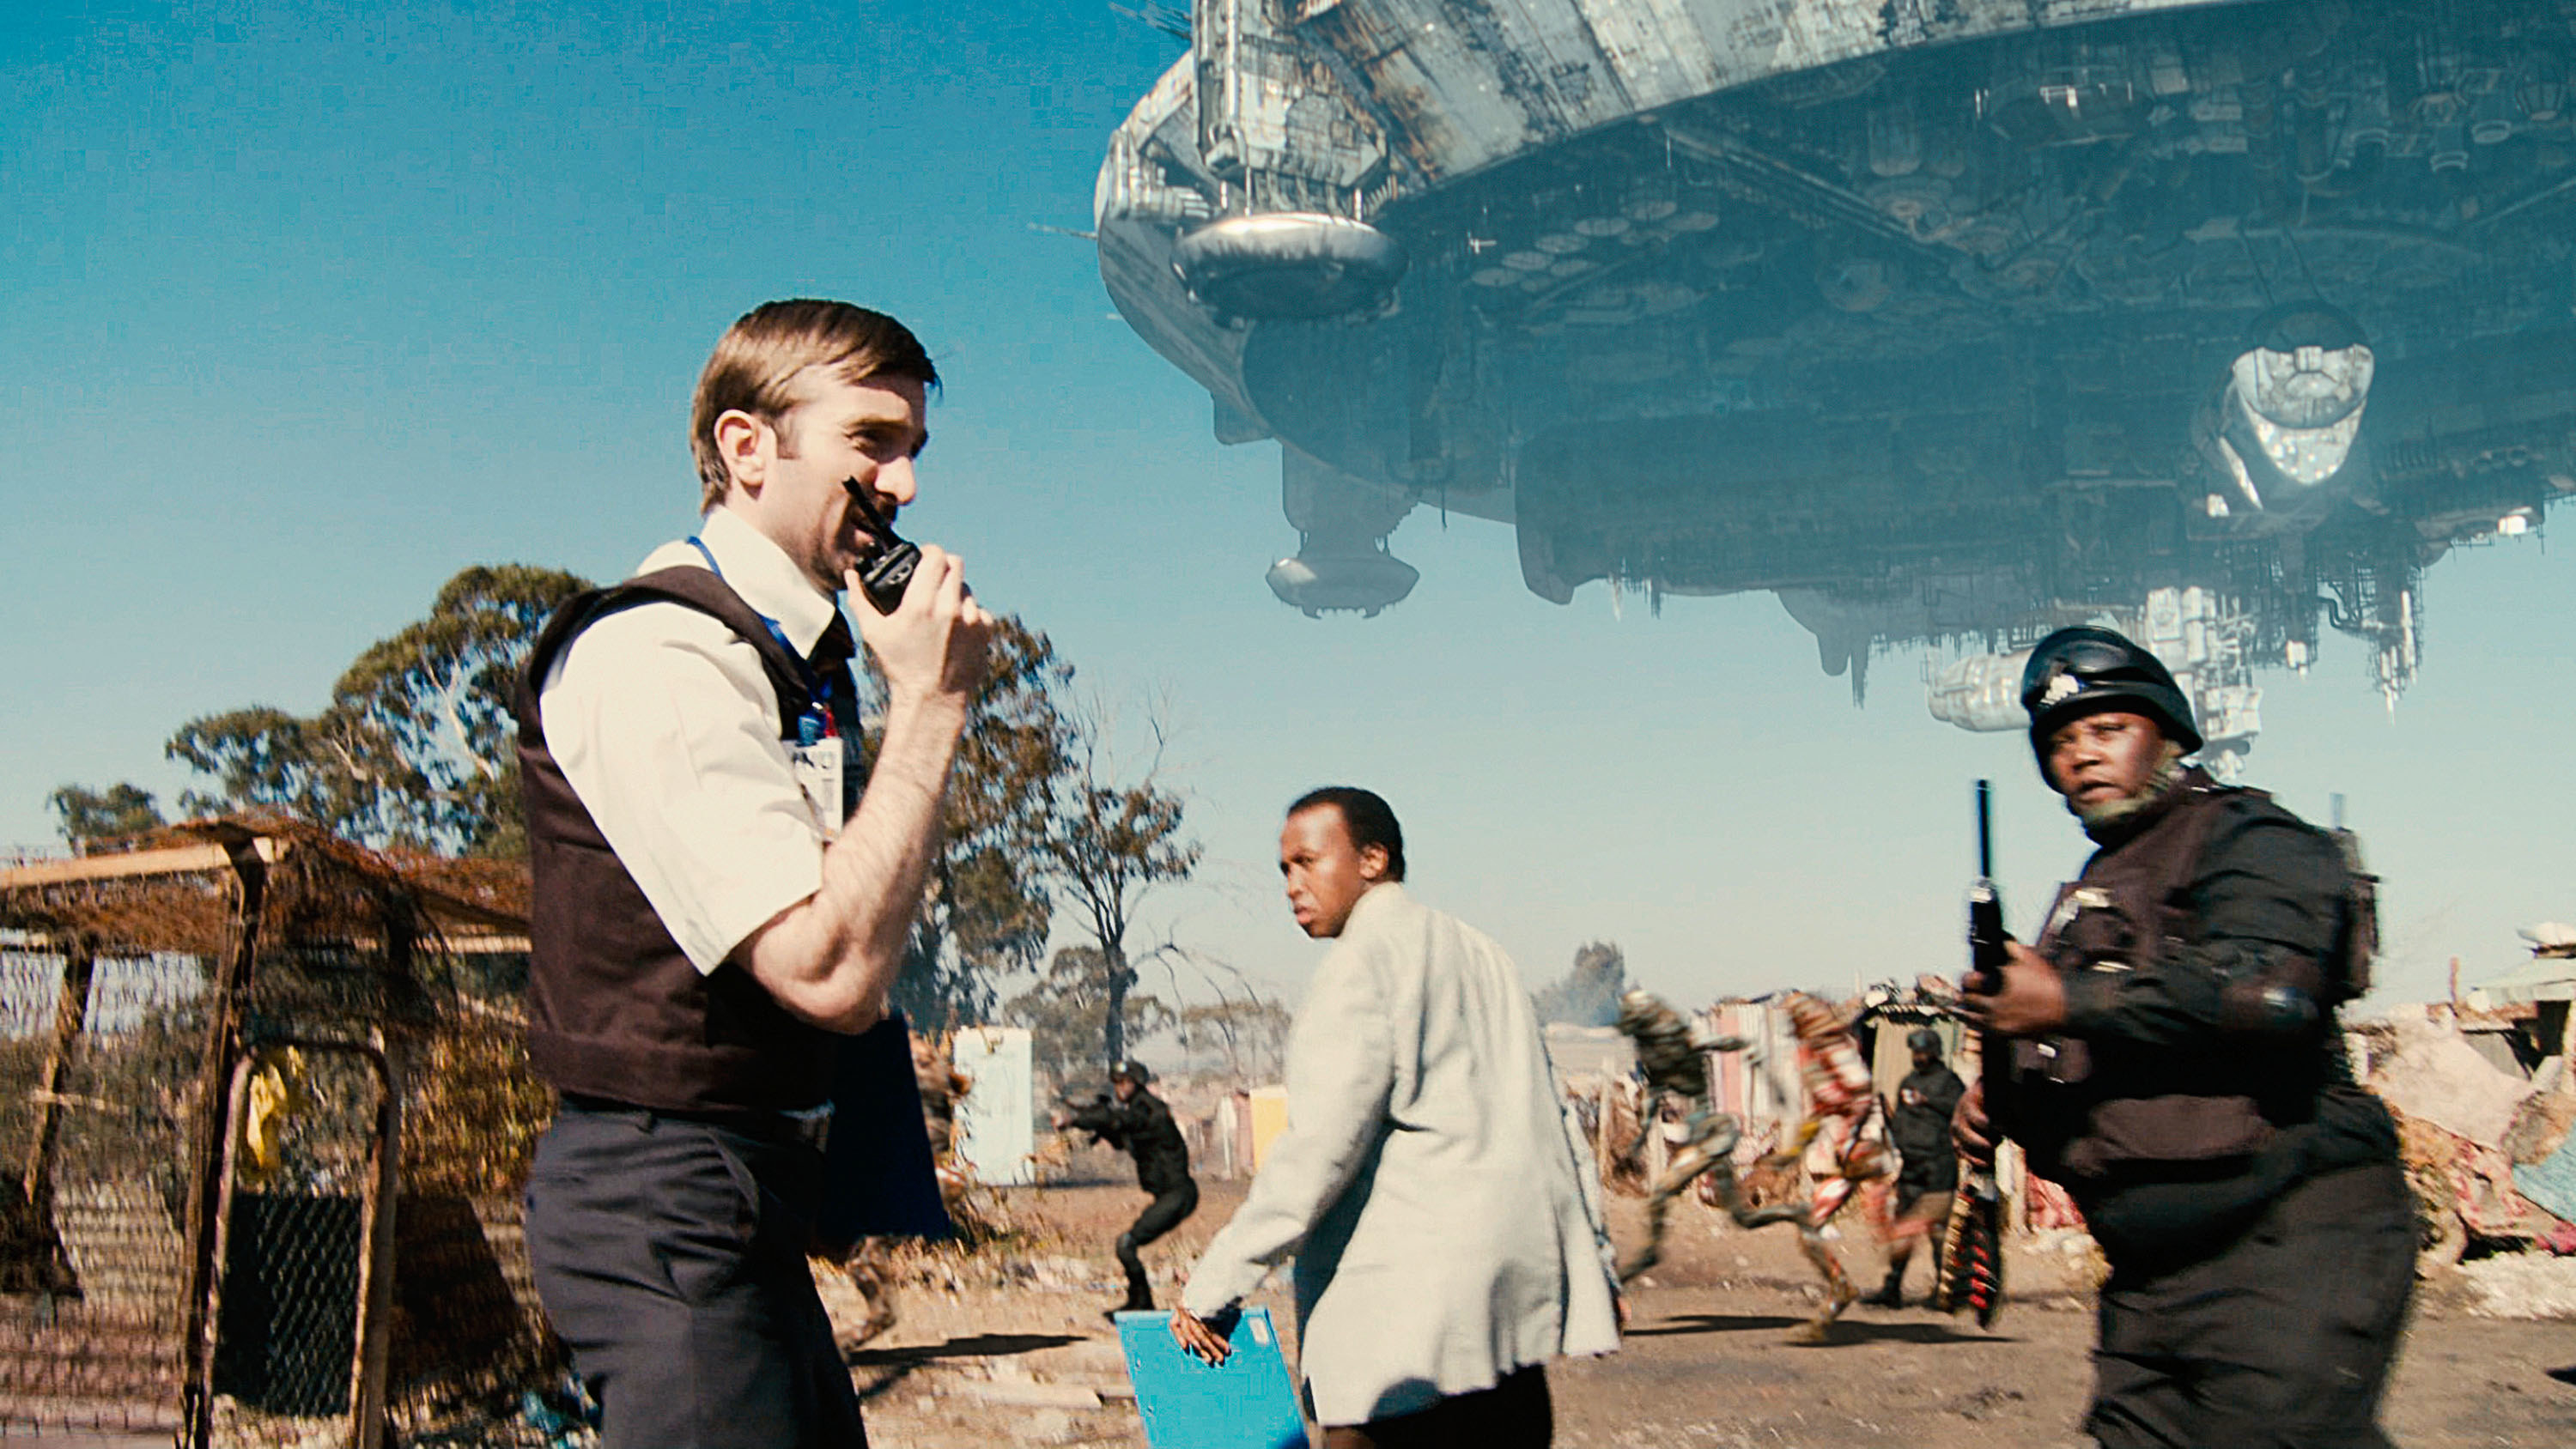 Sharlto Copley, Mandla Gaduka, Kenneth Nkosi dressed as police officers, a giant alien ship in the sky above them